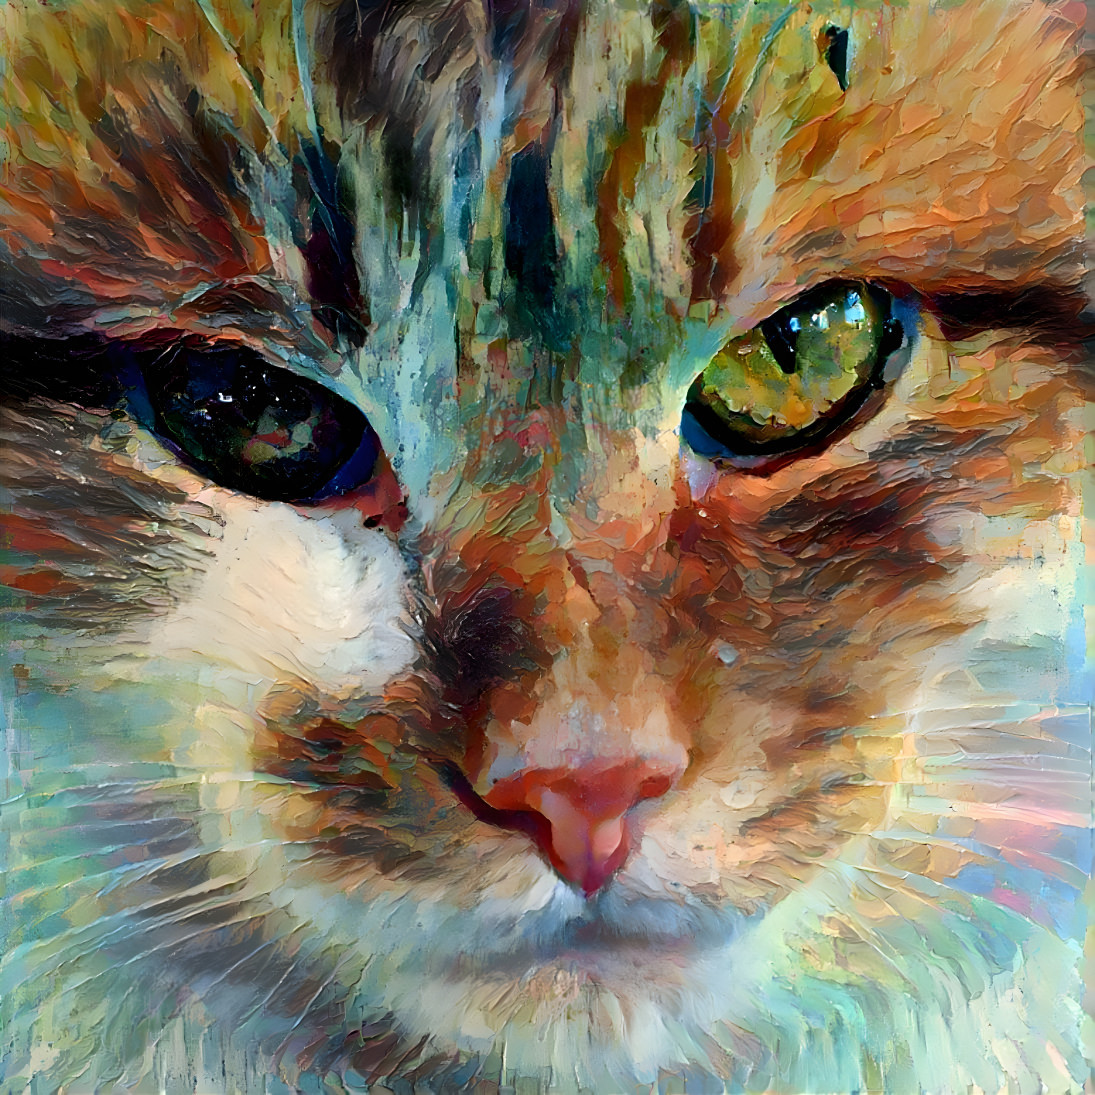 The cat painting